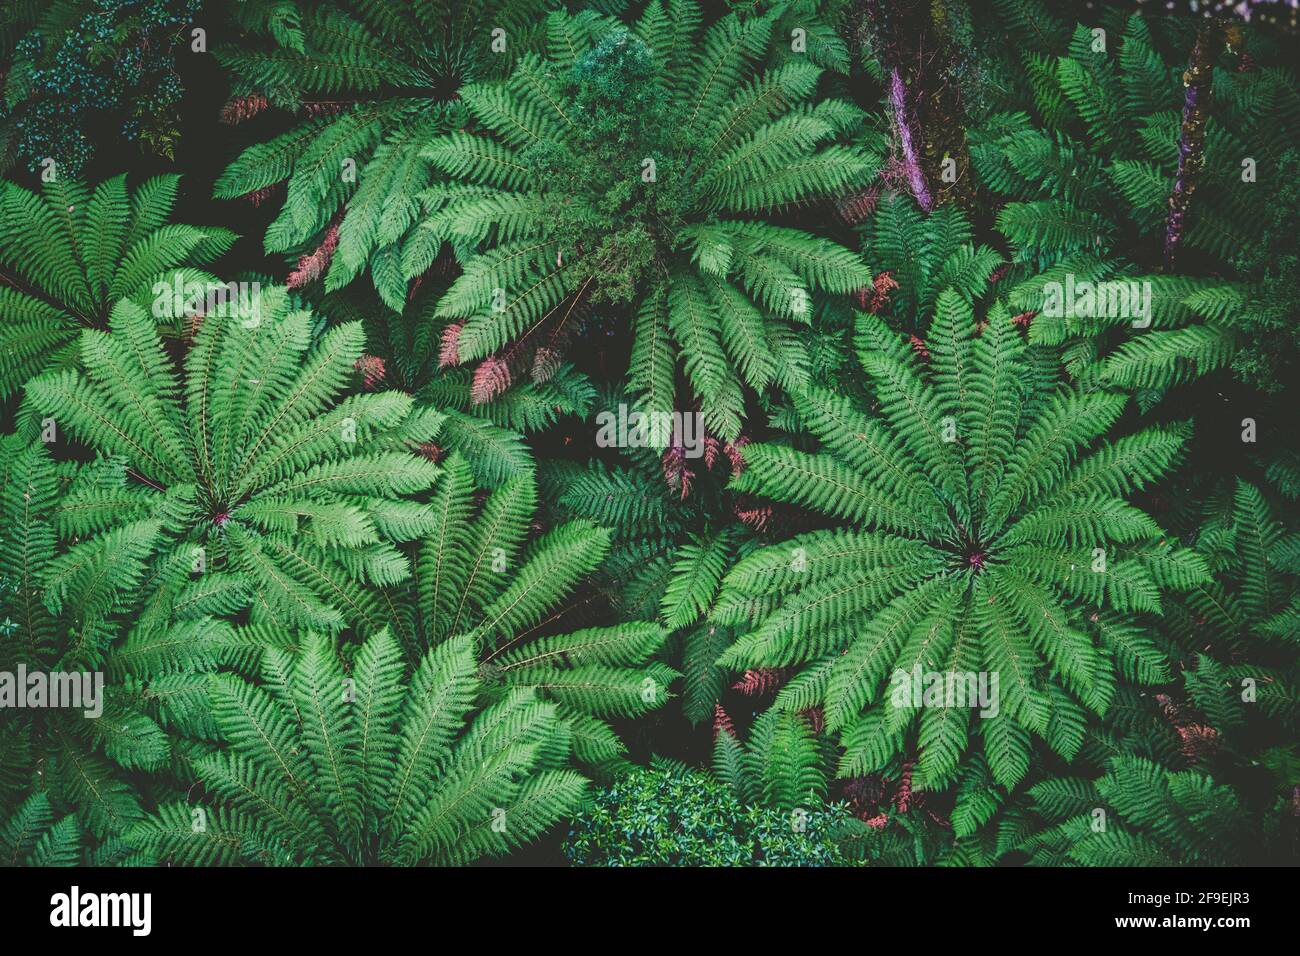 Lush green ferns in a rainforest - top down view Stock Photo